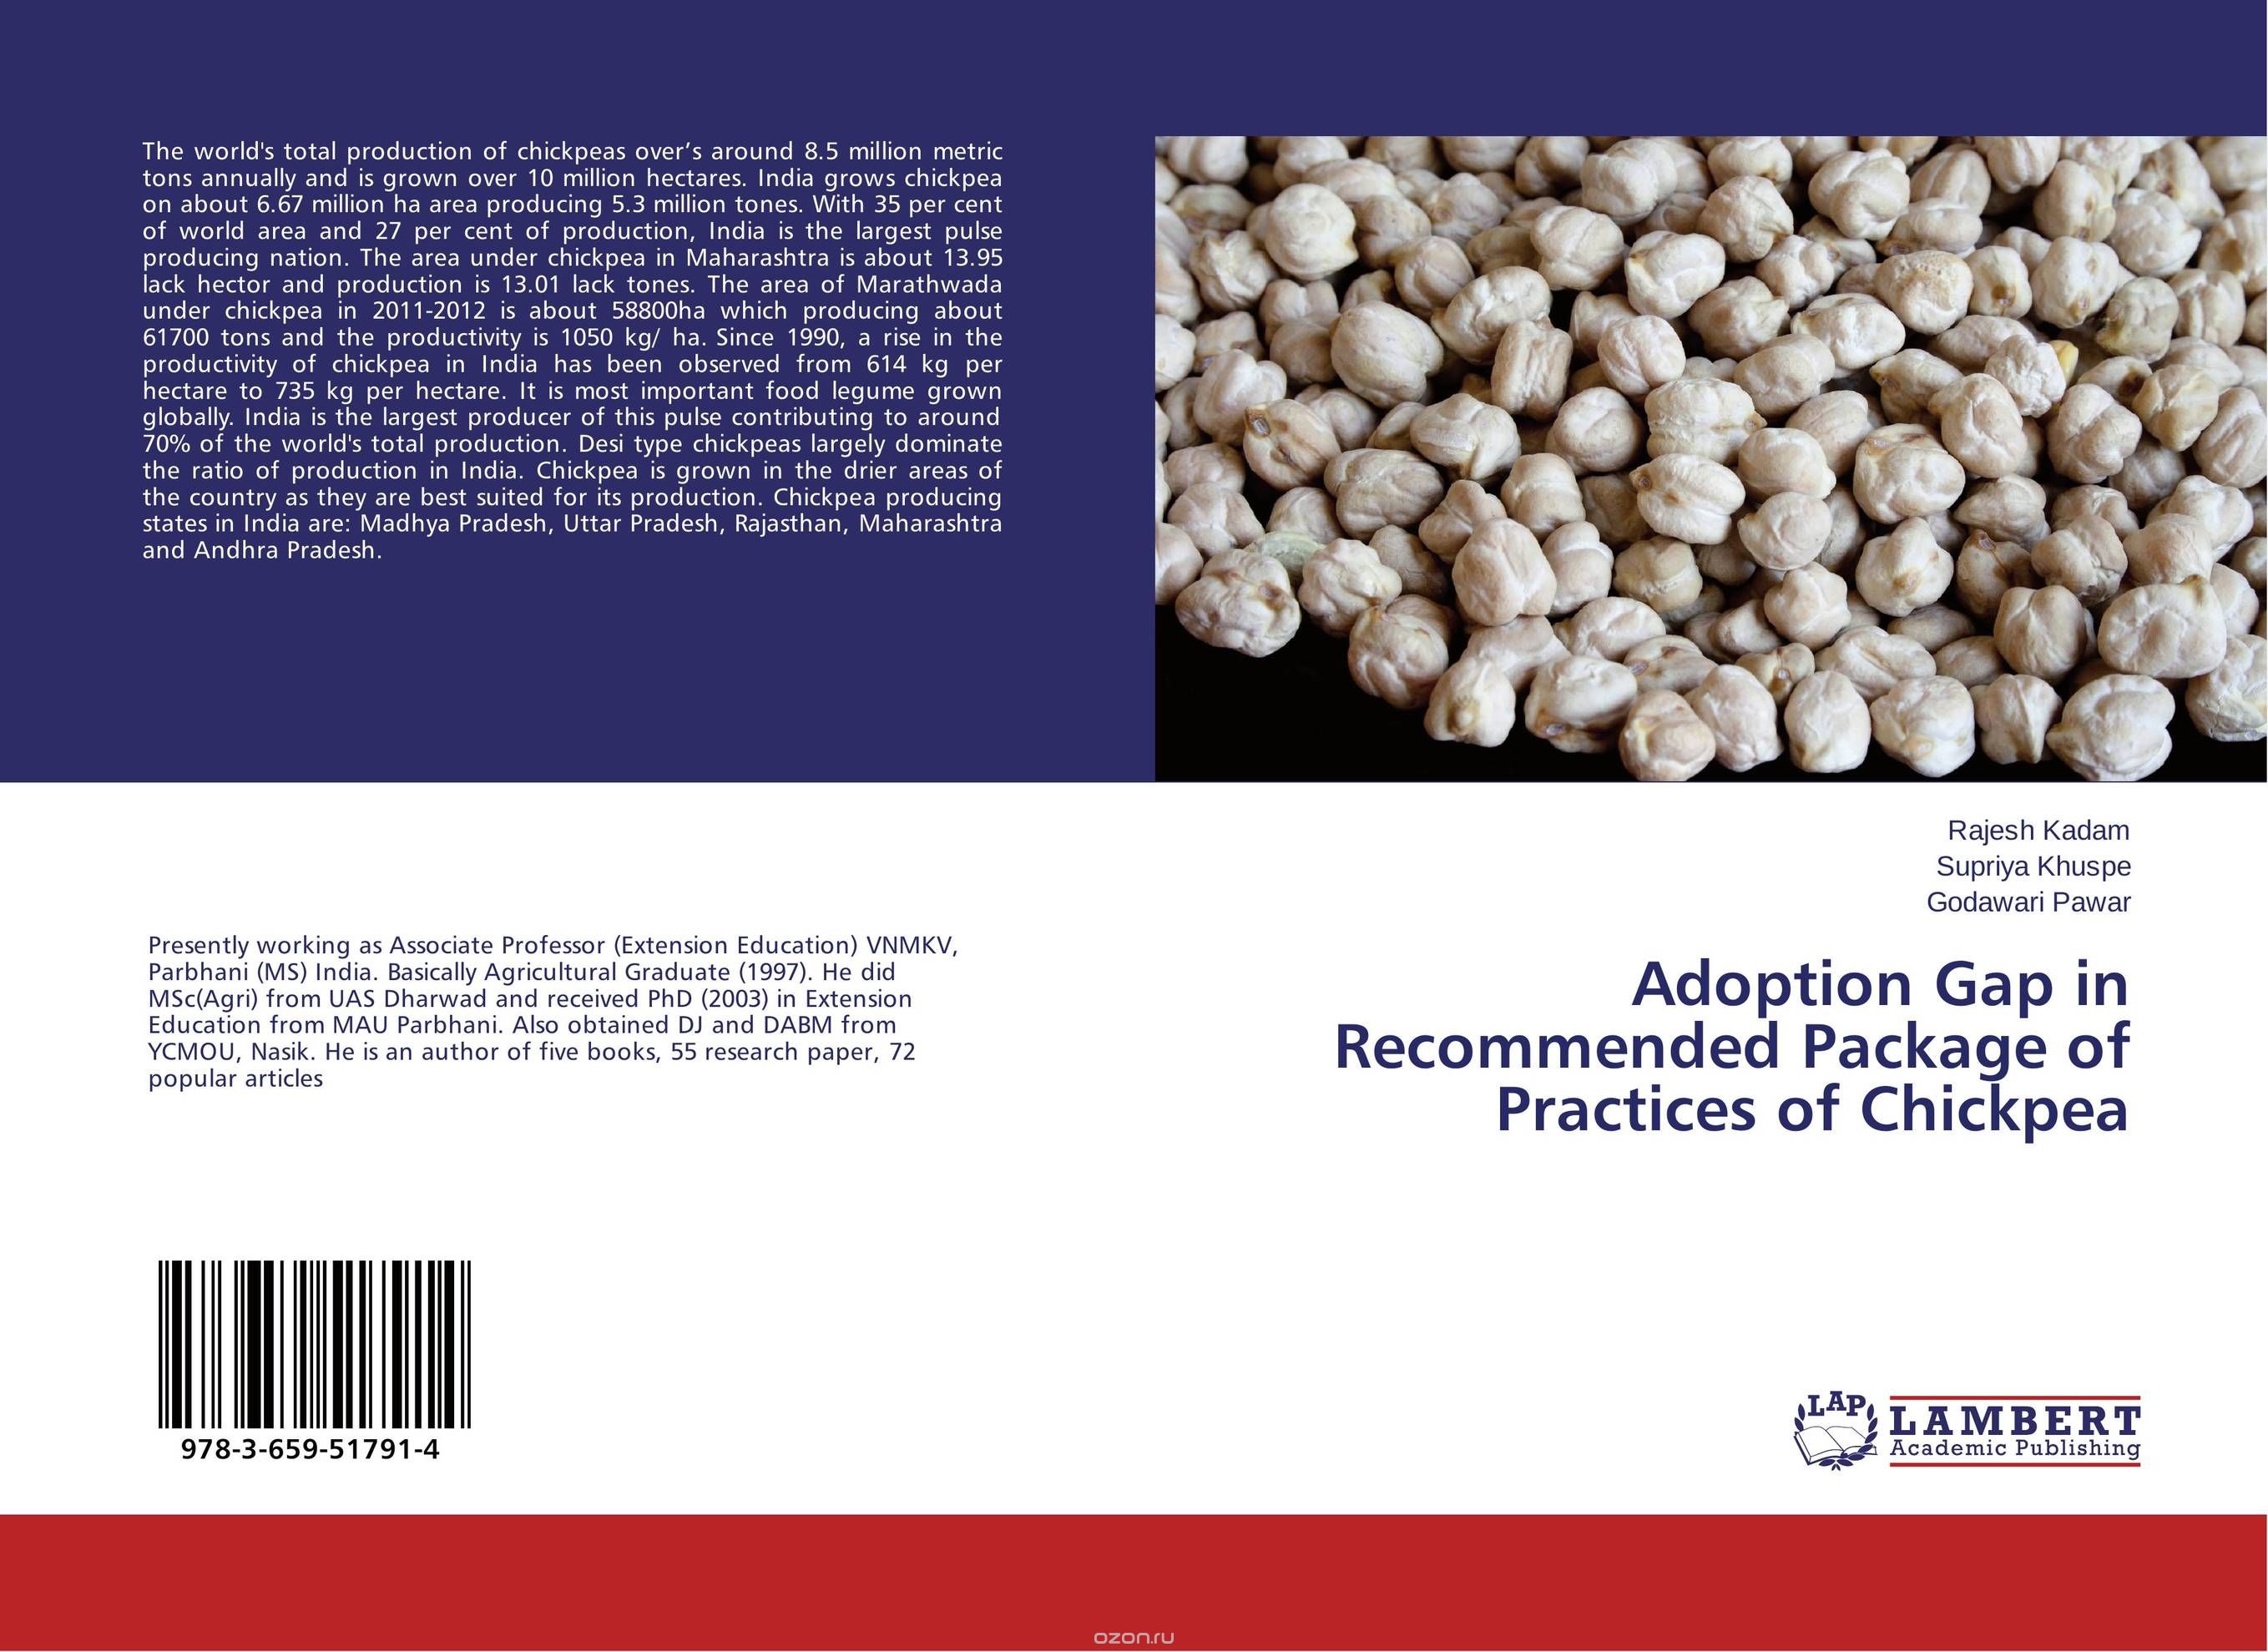 Adoption Gap in Recommended Package of Practices of Chickpea